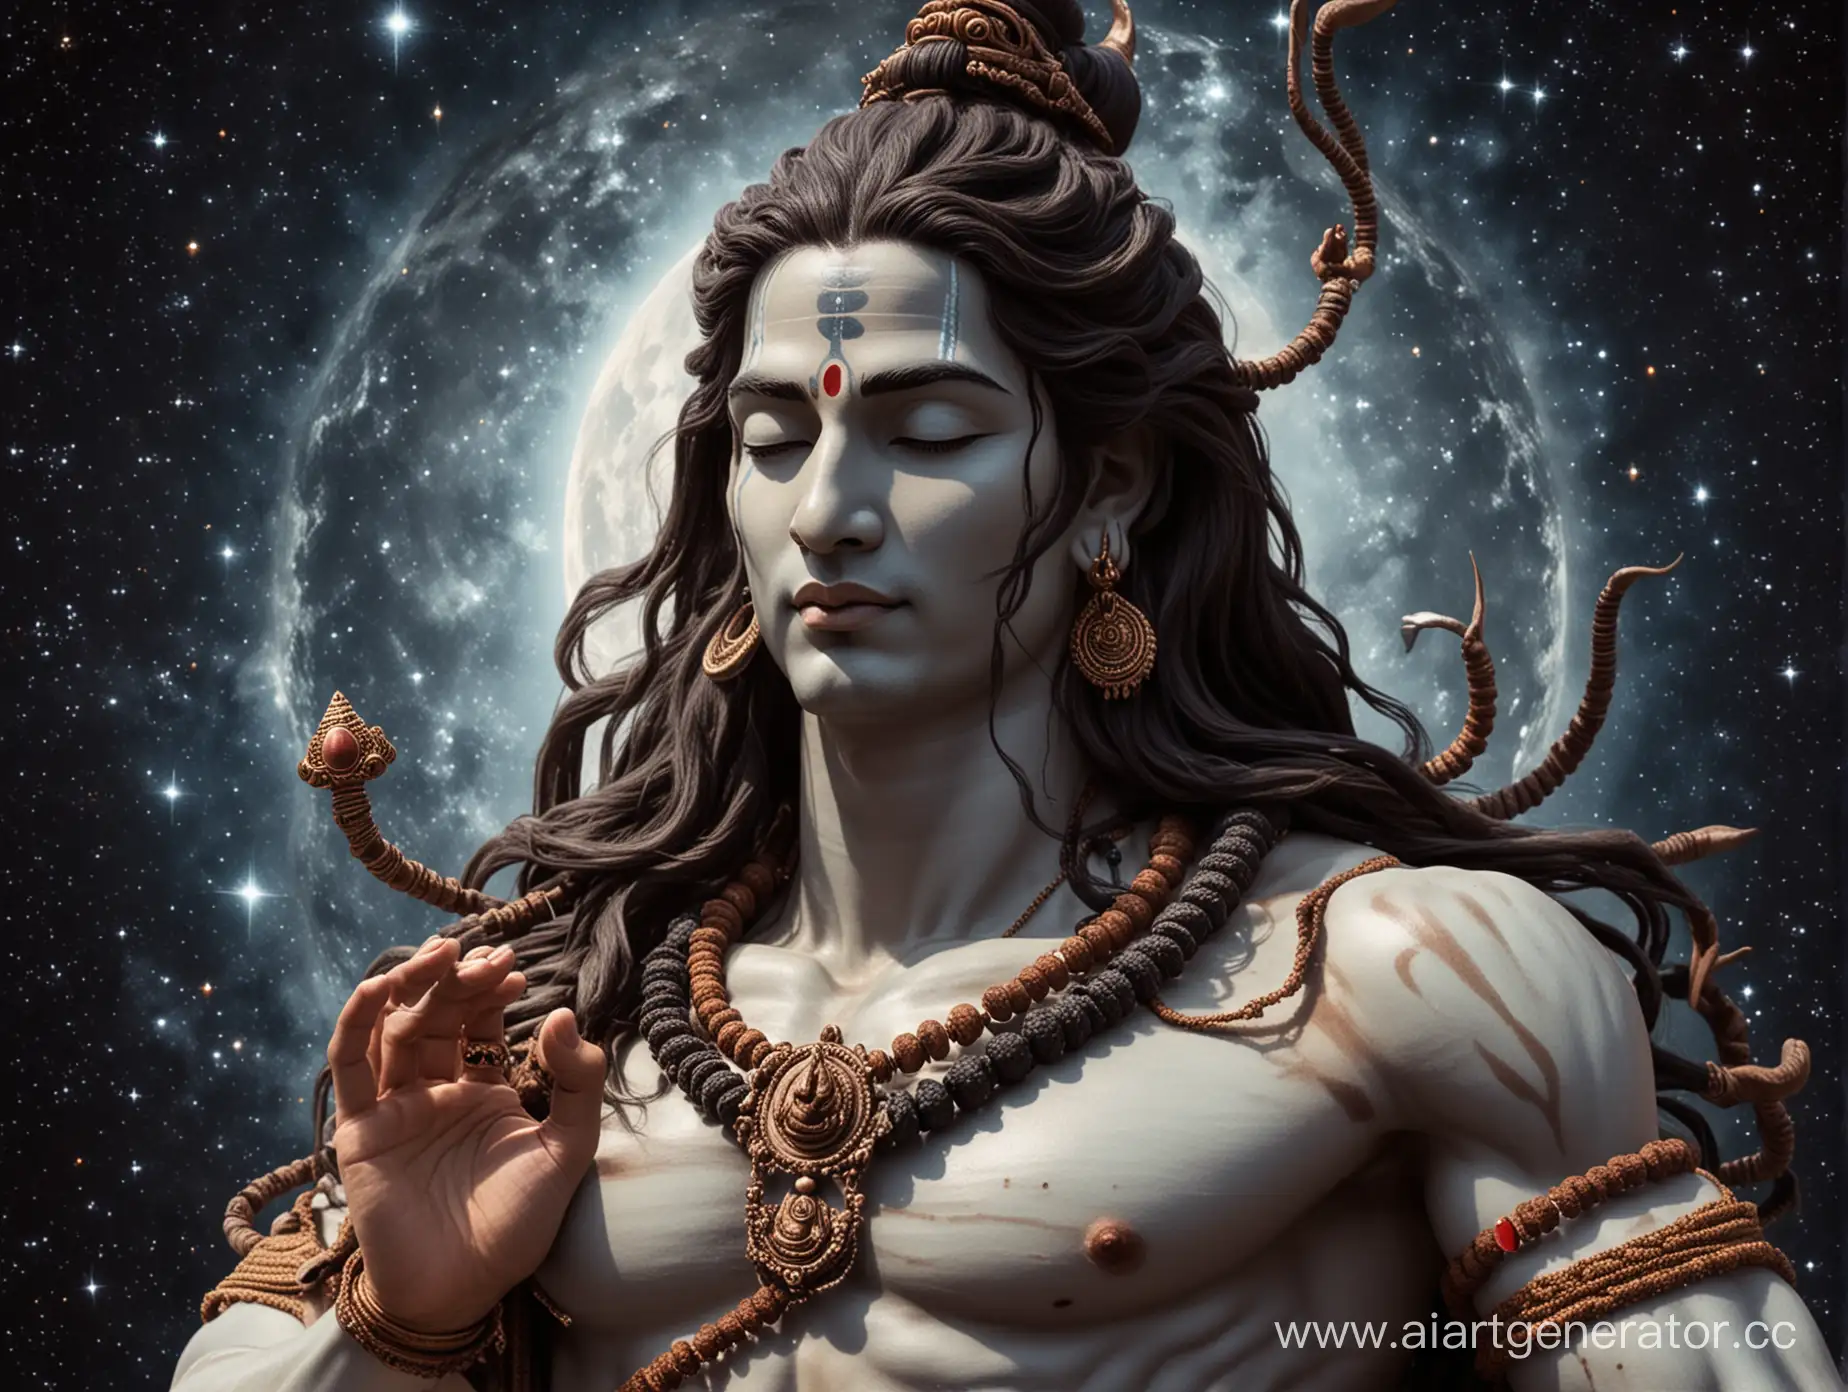 Lord Shiva floats in space in meditation with his eyes closed. He has a rudraksha rosary around his neck and a cobra around his neck.